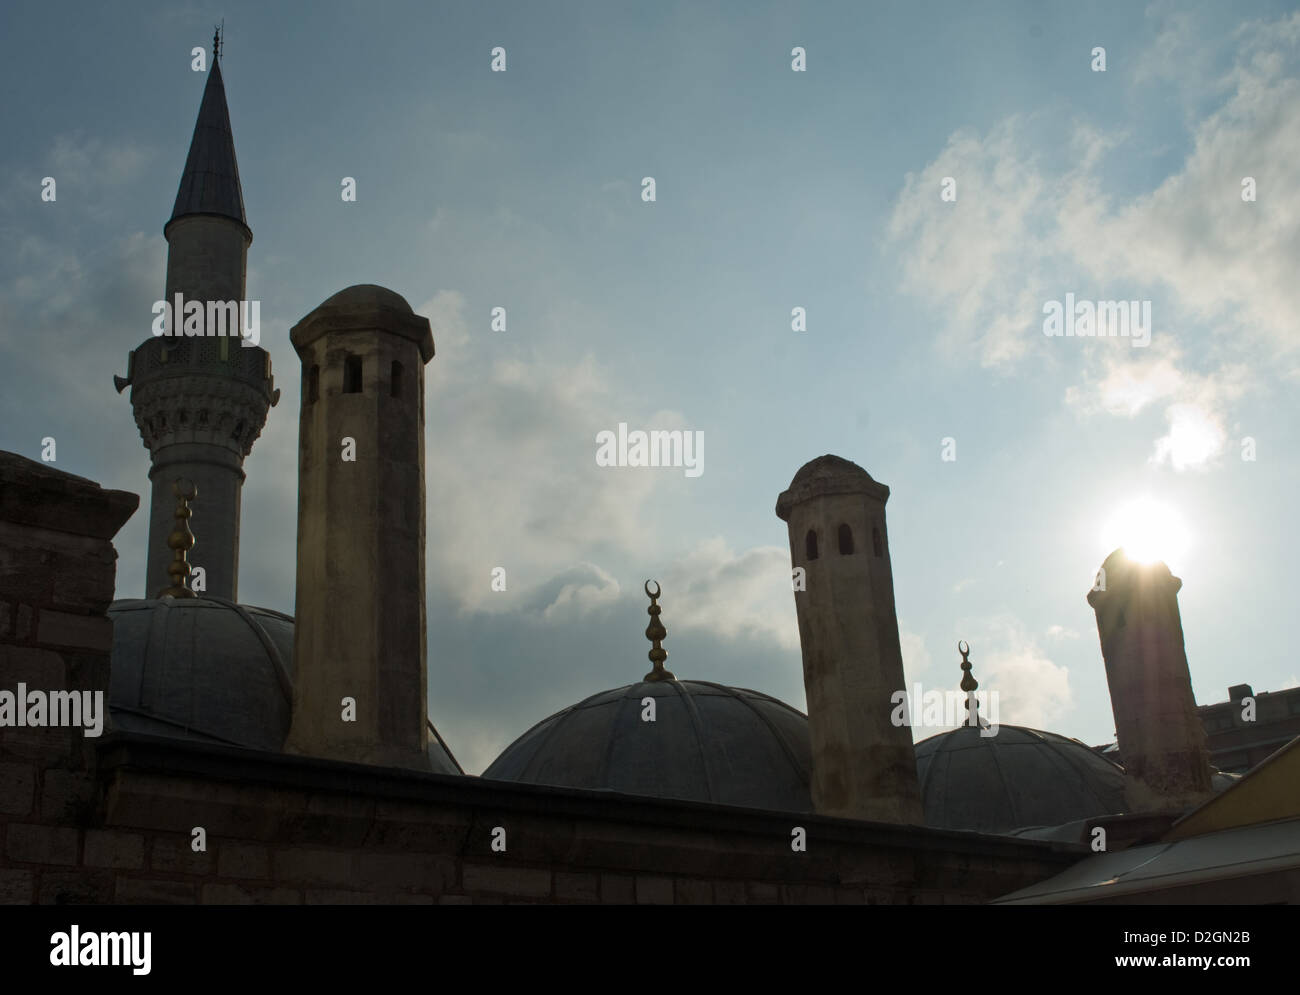 Mosque skyline in Fatih, Istanbul. Stock Photo